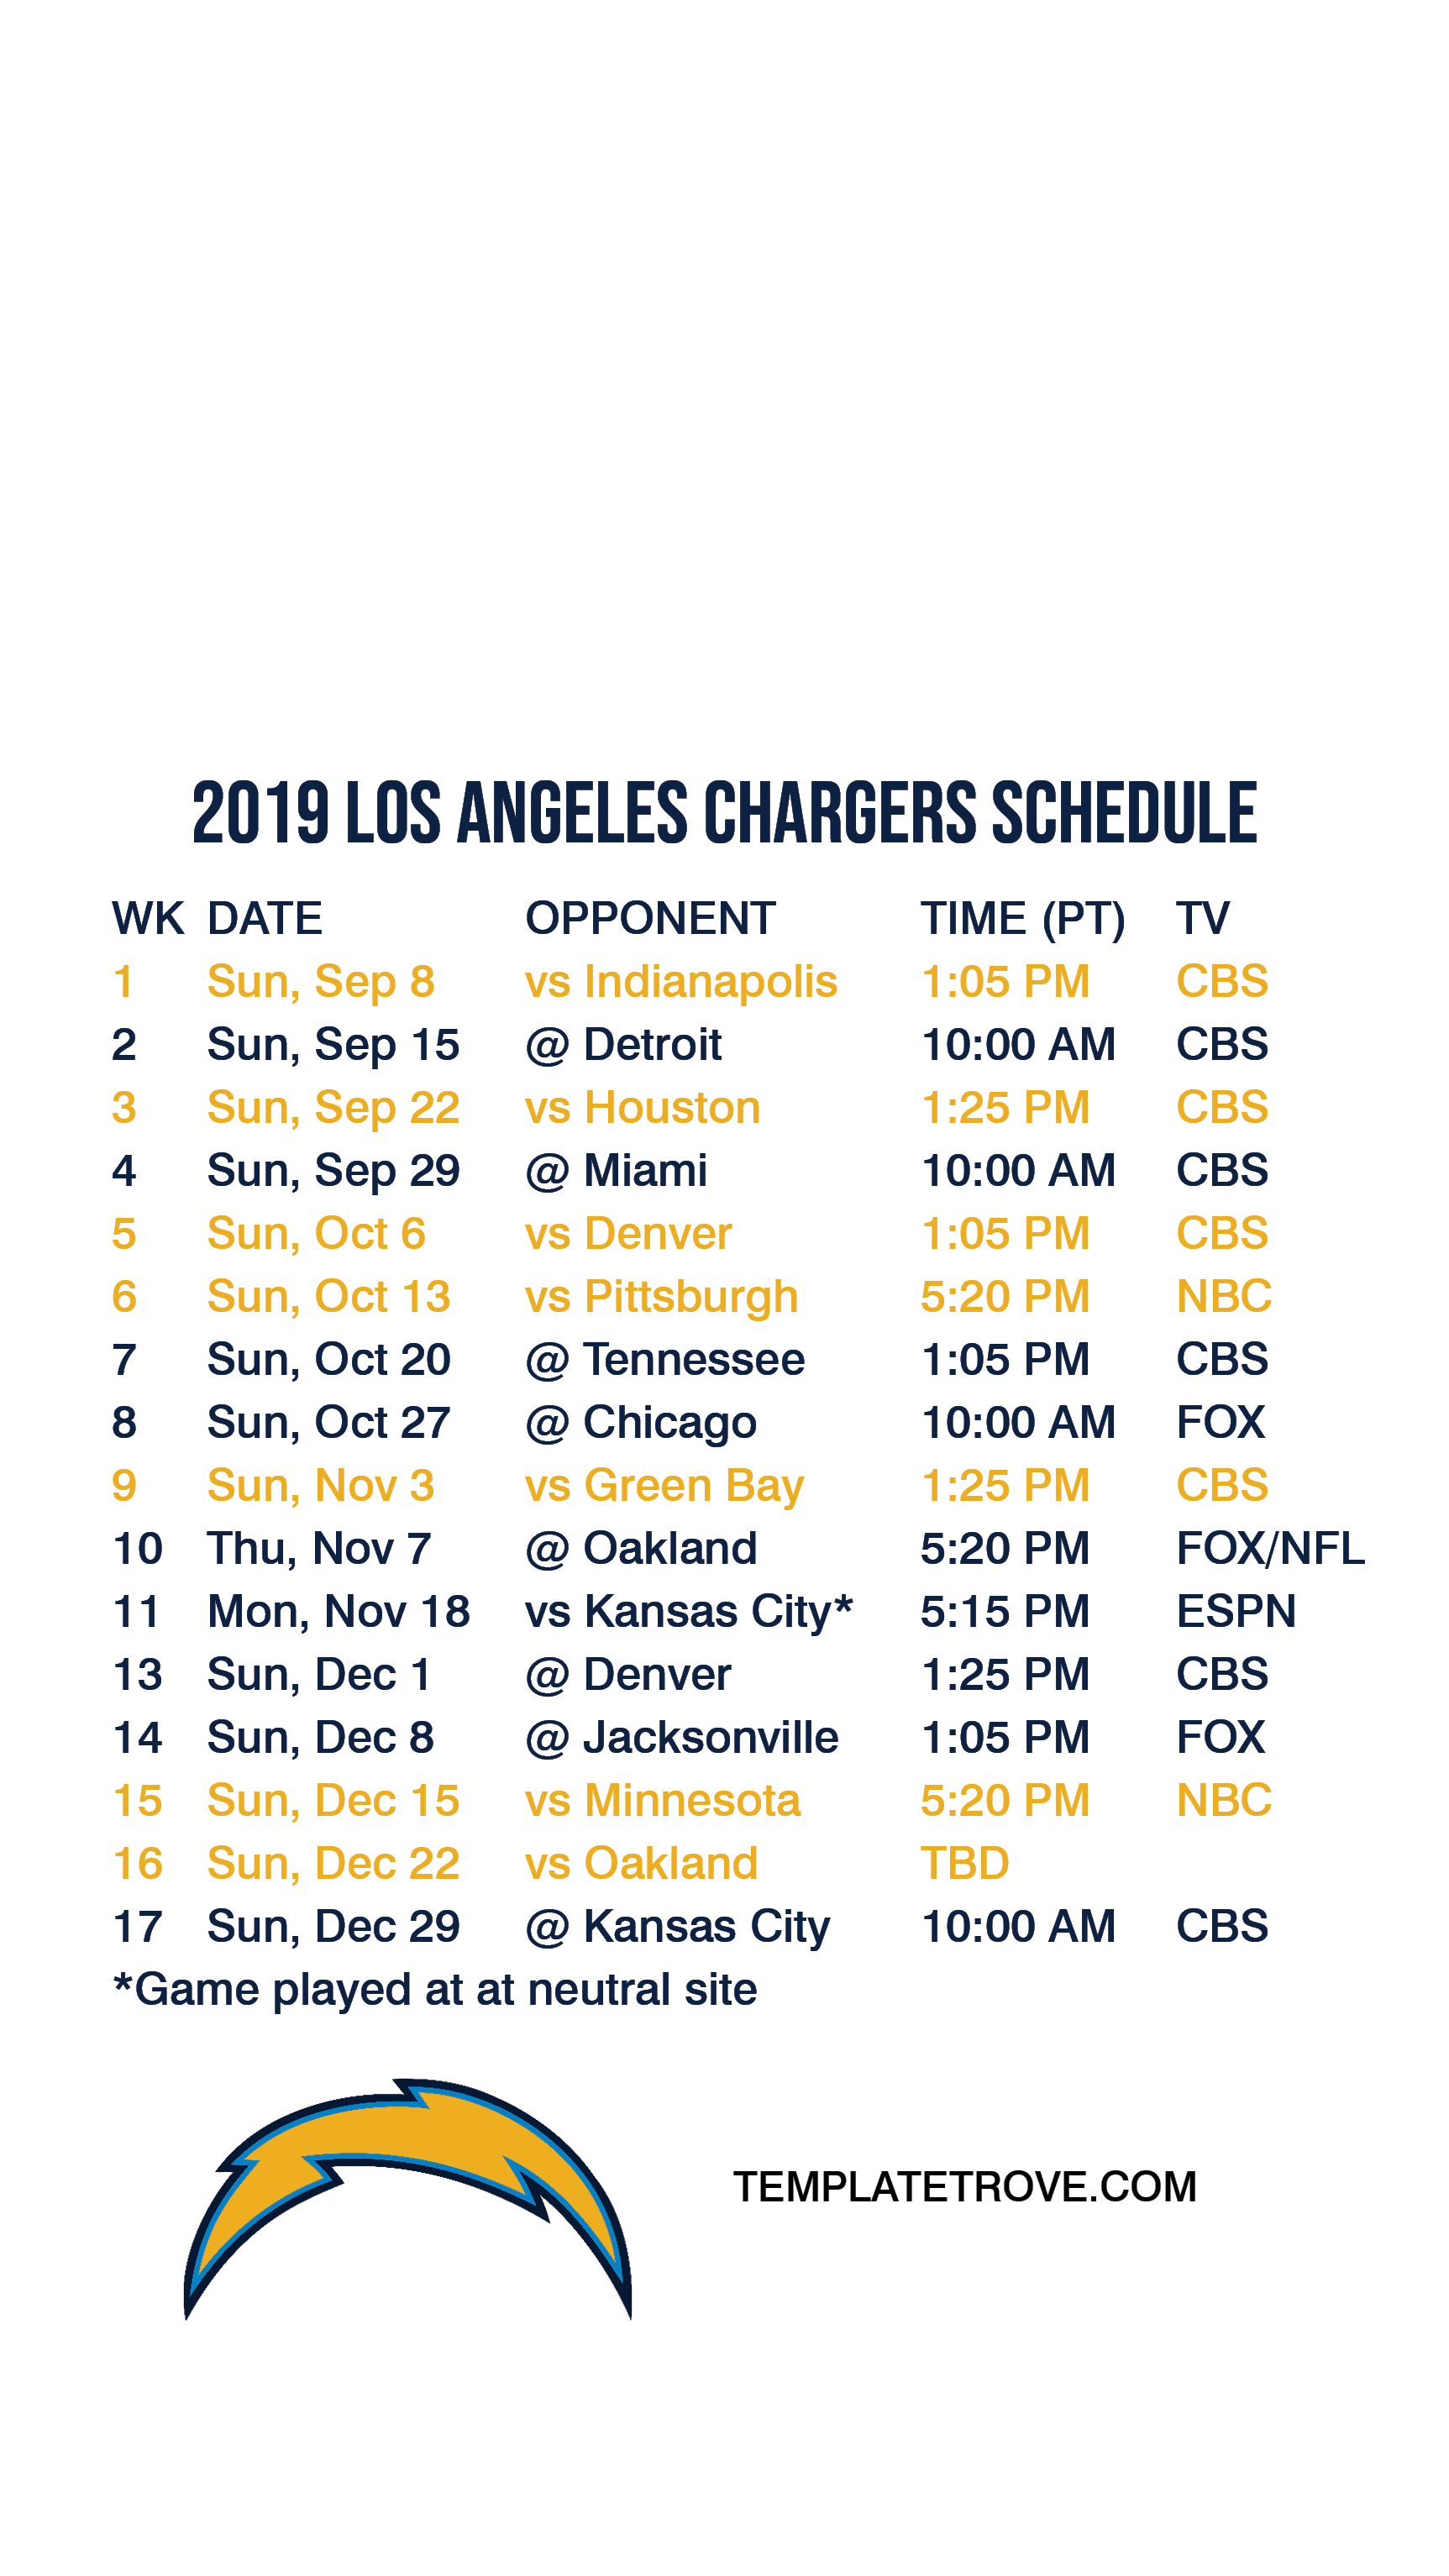 2019-2020 Los Angeles Chargers Lock Screen Schedule for iPhone 6-7-8 Plus1725 x 3067